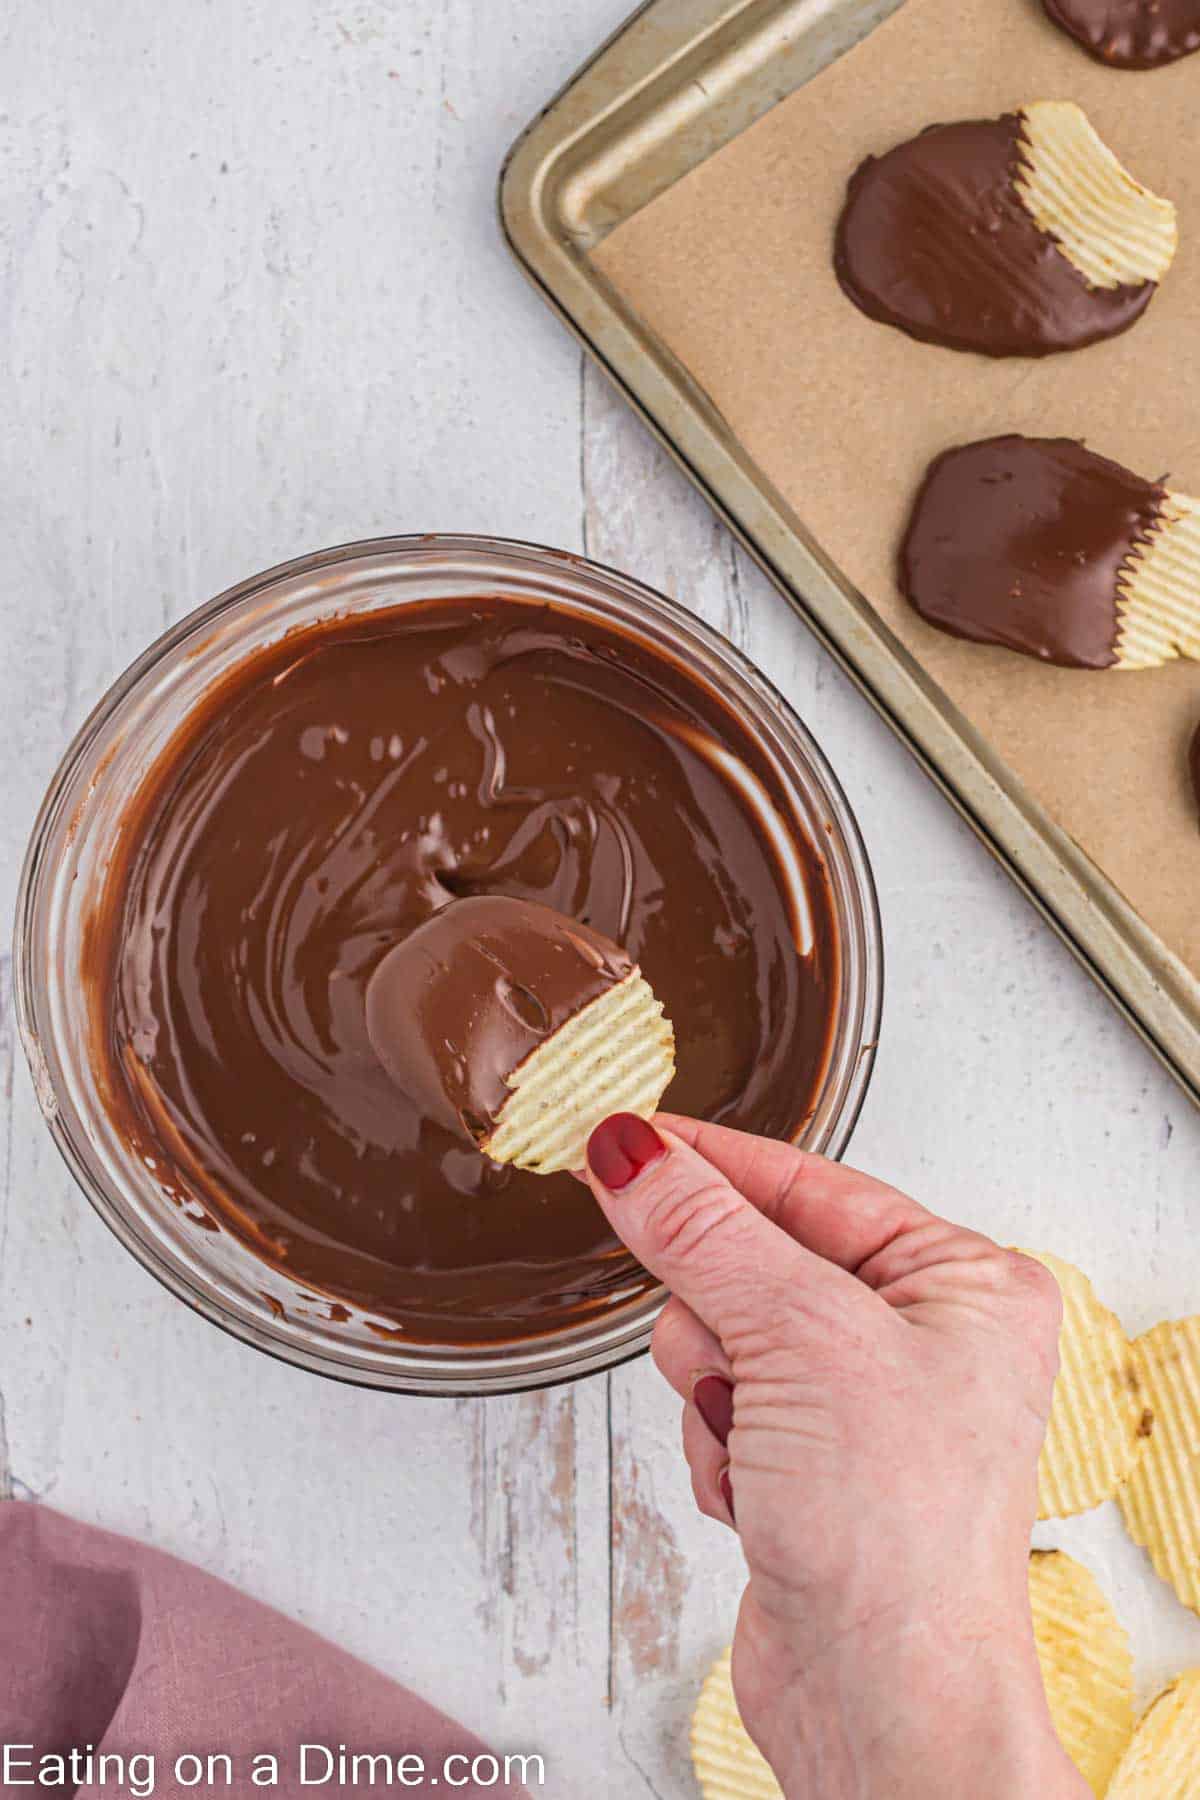 Melting chocolate in a bowl with a potato chip being dipped into the melted chocolate